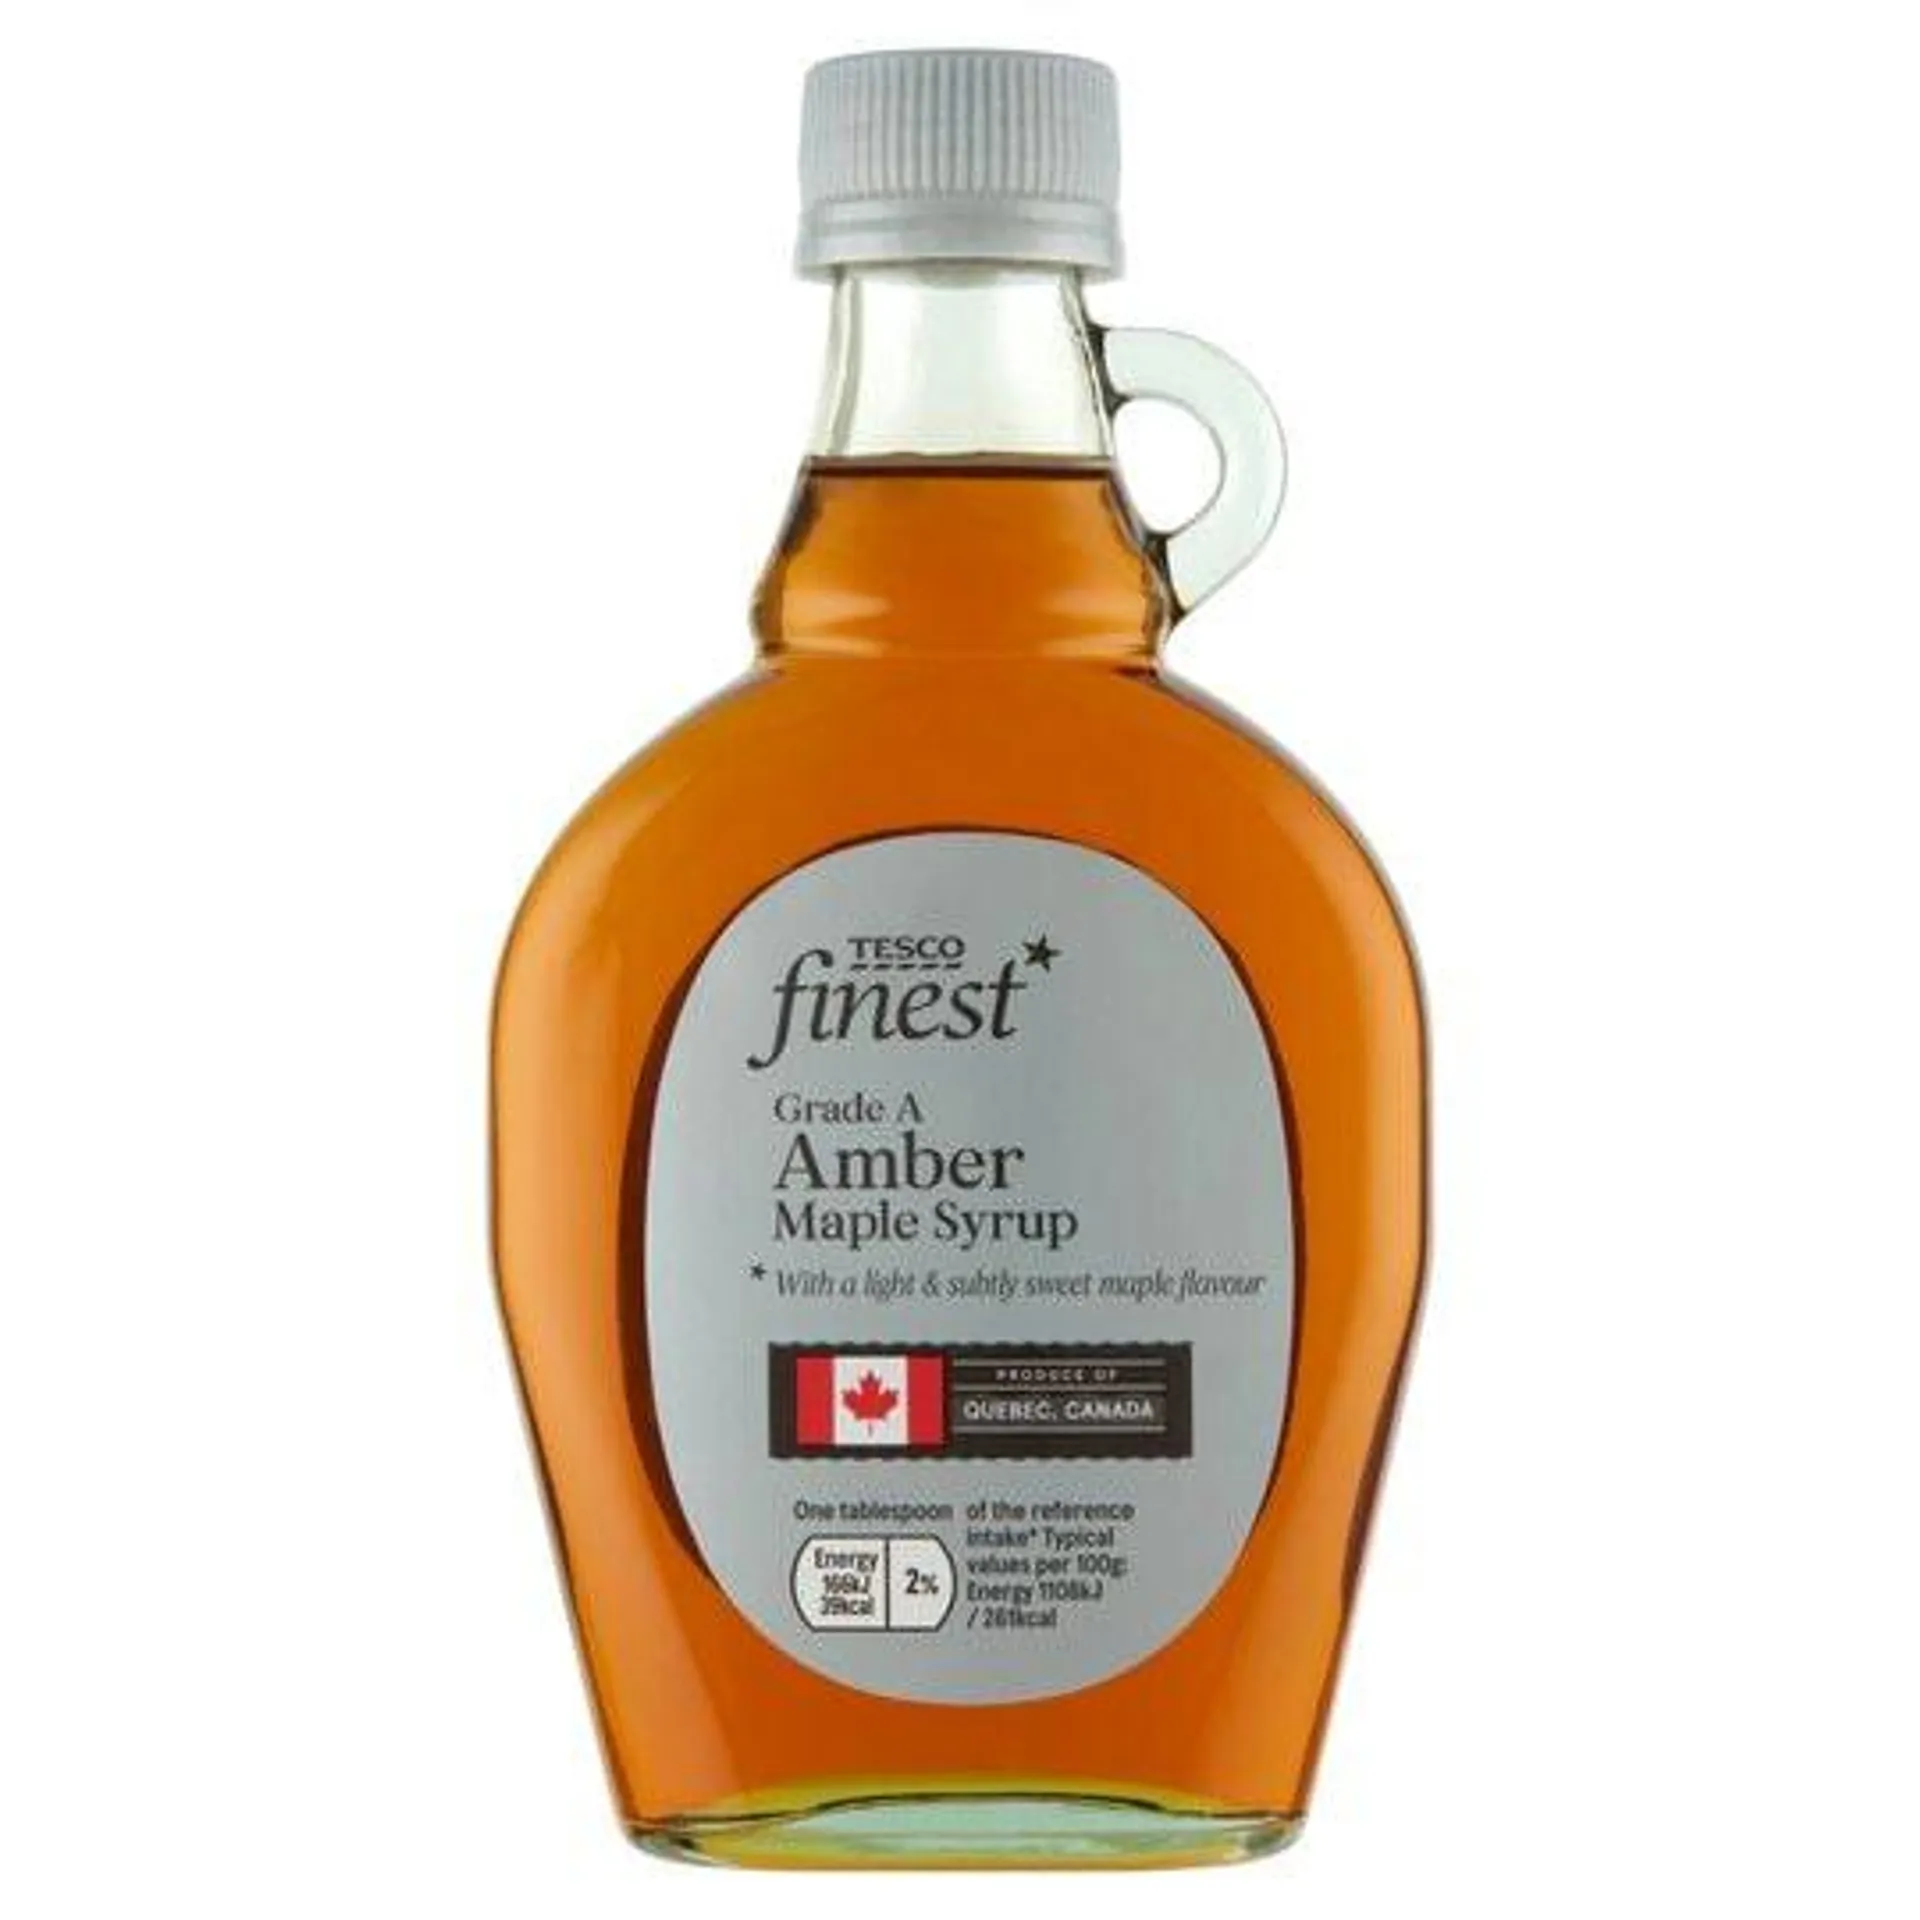 Tesco Finest Grade A Amber Maple Syrup 330G